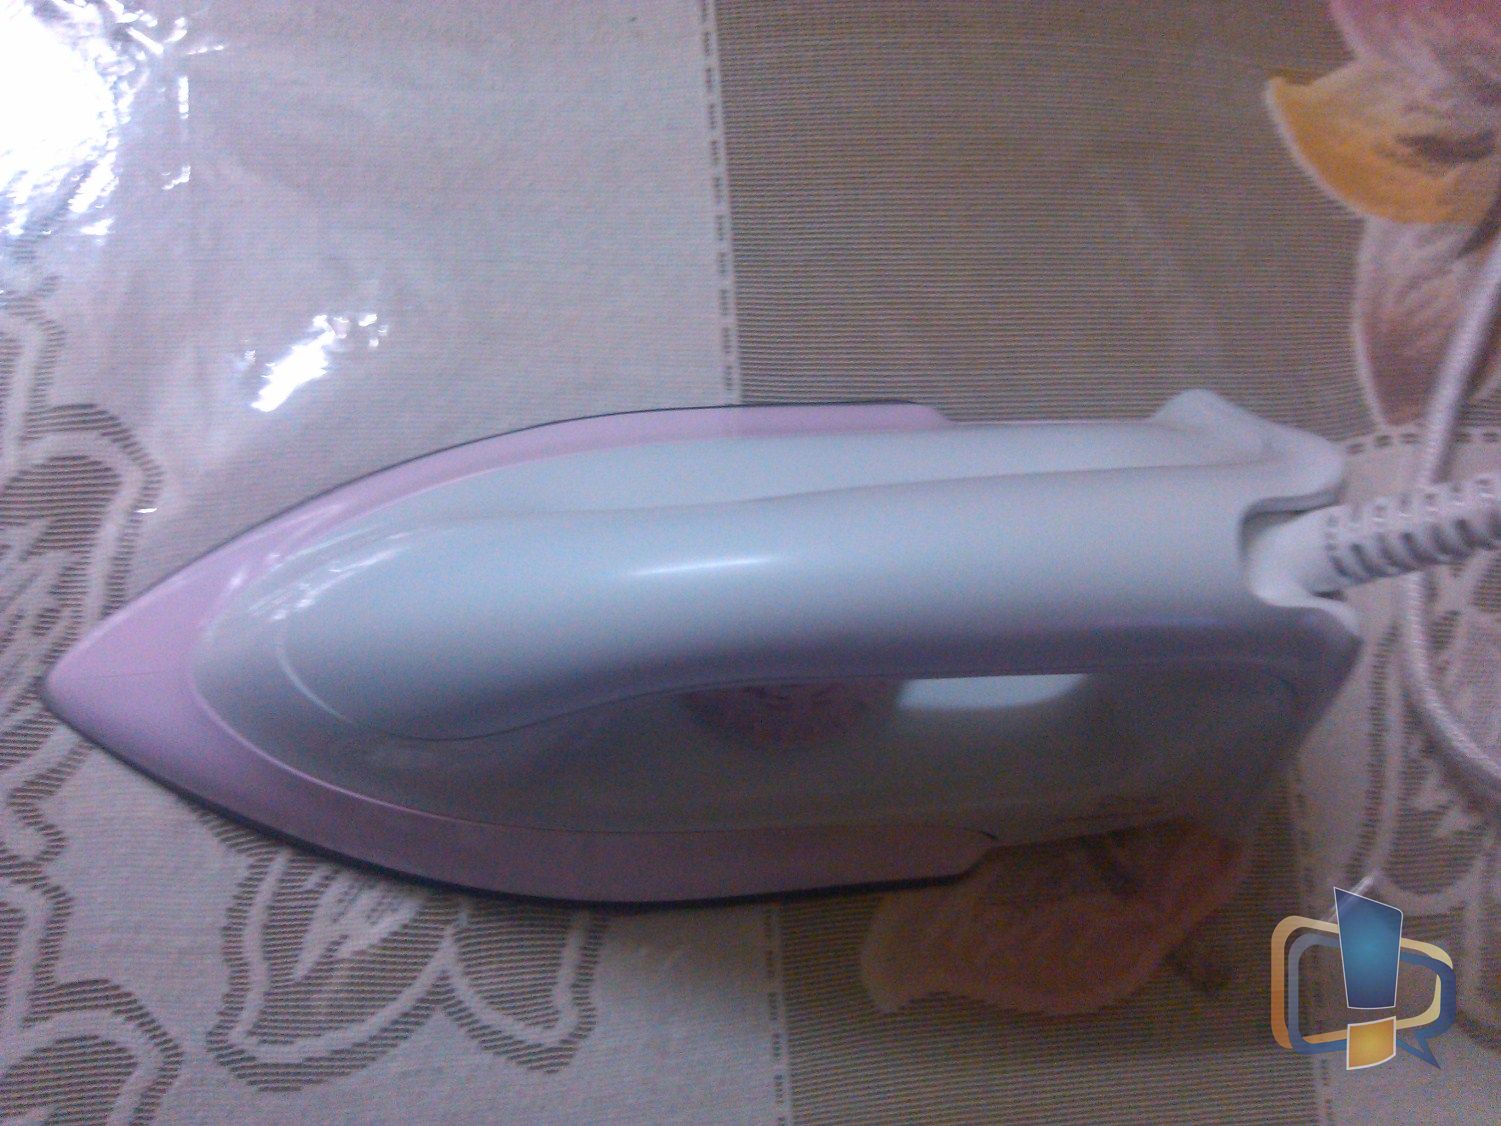 Philips Dry Iron Review